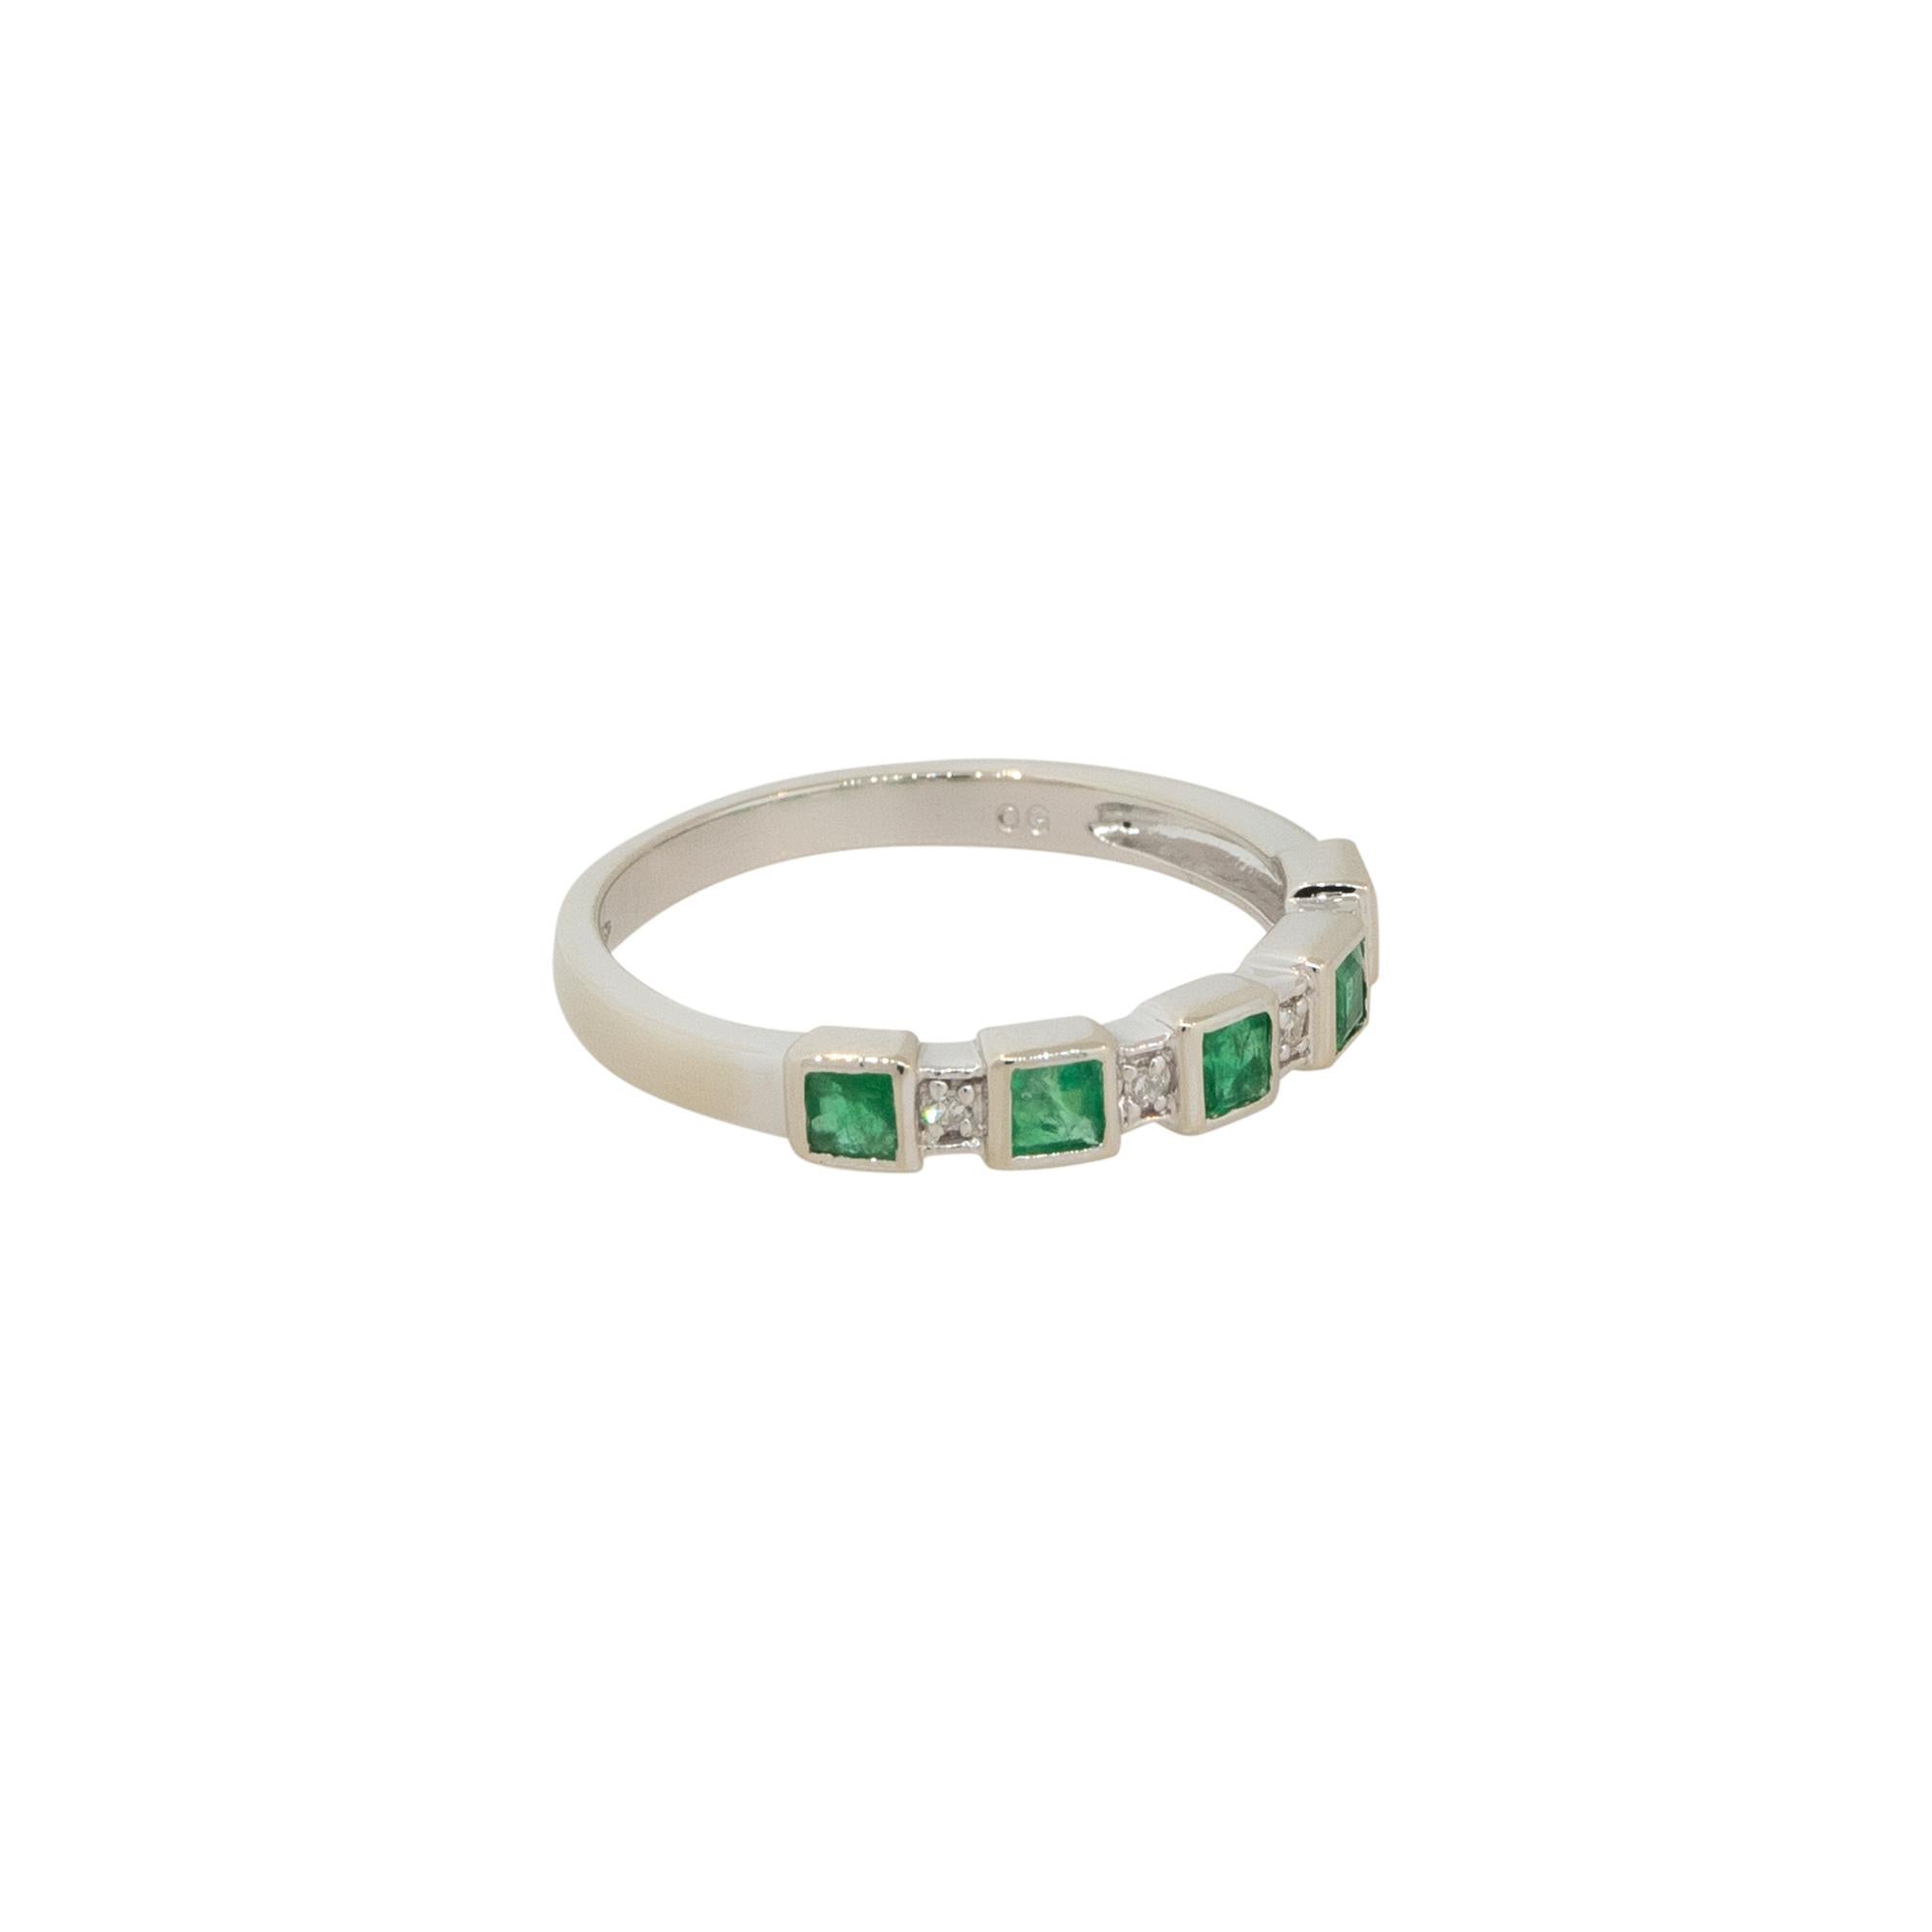 Material: 14k White Gold
Diamond Details: Approx. 0.04ctw of Round Diamonds. Diamonds are G/H in color and VS/SI in clarity
Gemstone Details: Approx. 0.15ctw of Square Emeralds
Weight: 1.3dwt
Additional Details: This item comes with a presentation